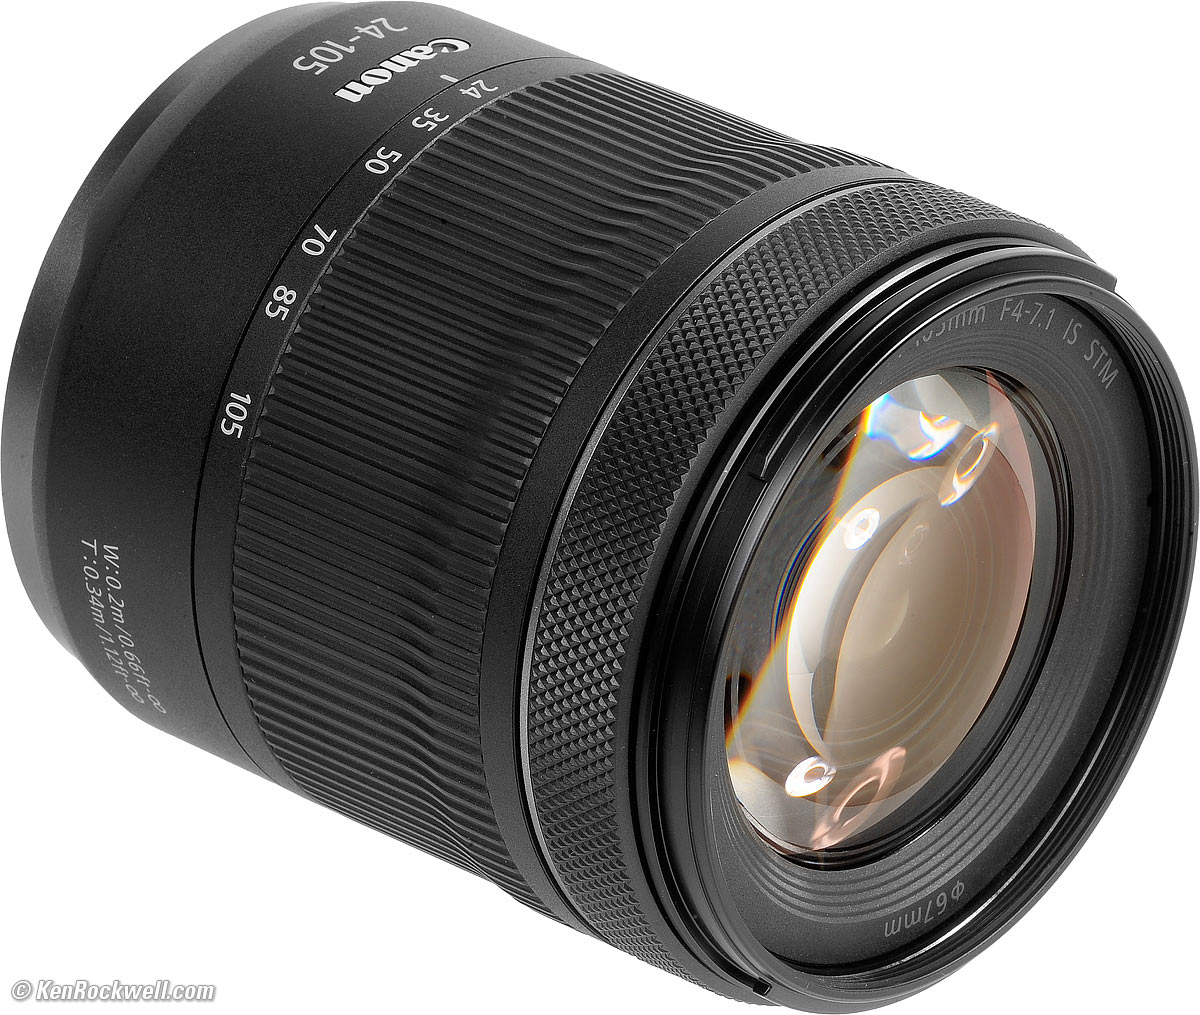 Canon RF 24-105mm STM Review